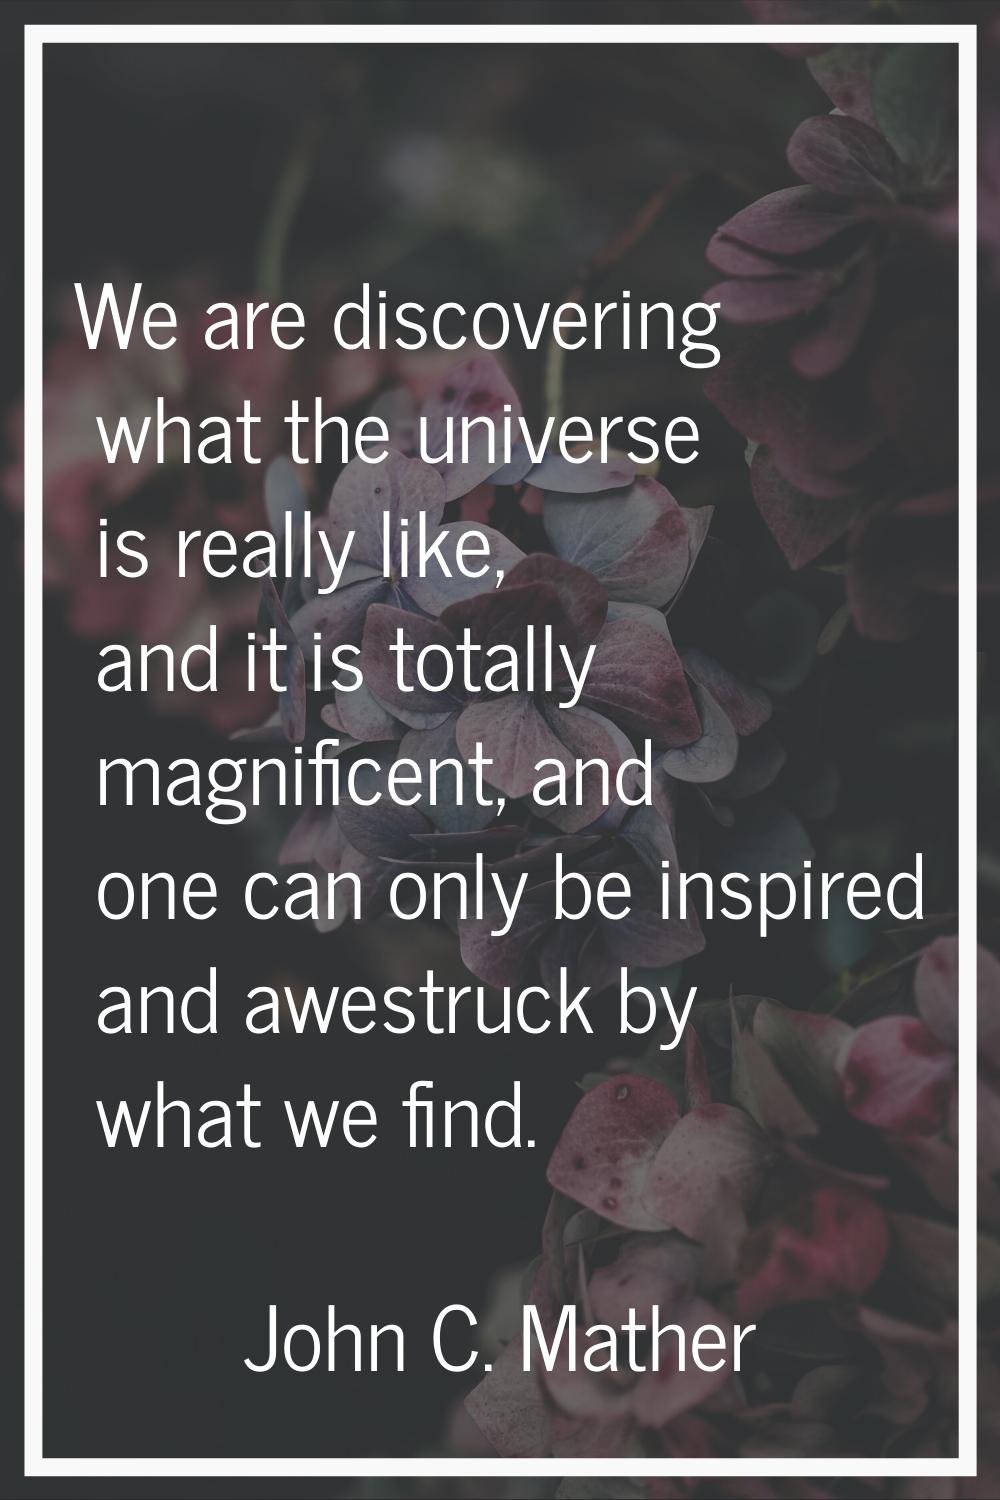 We are discovering what the universe is really like, and it is totally magnificent, and one can onl